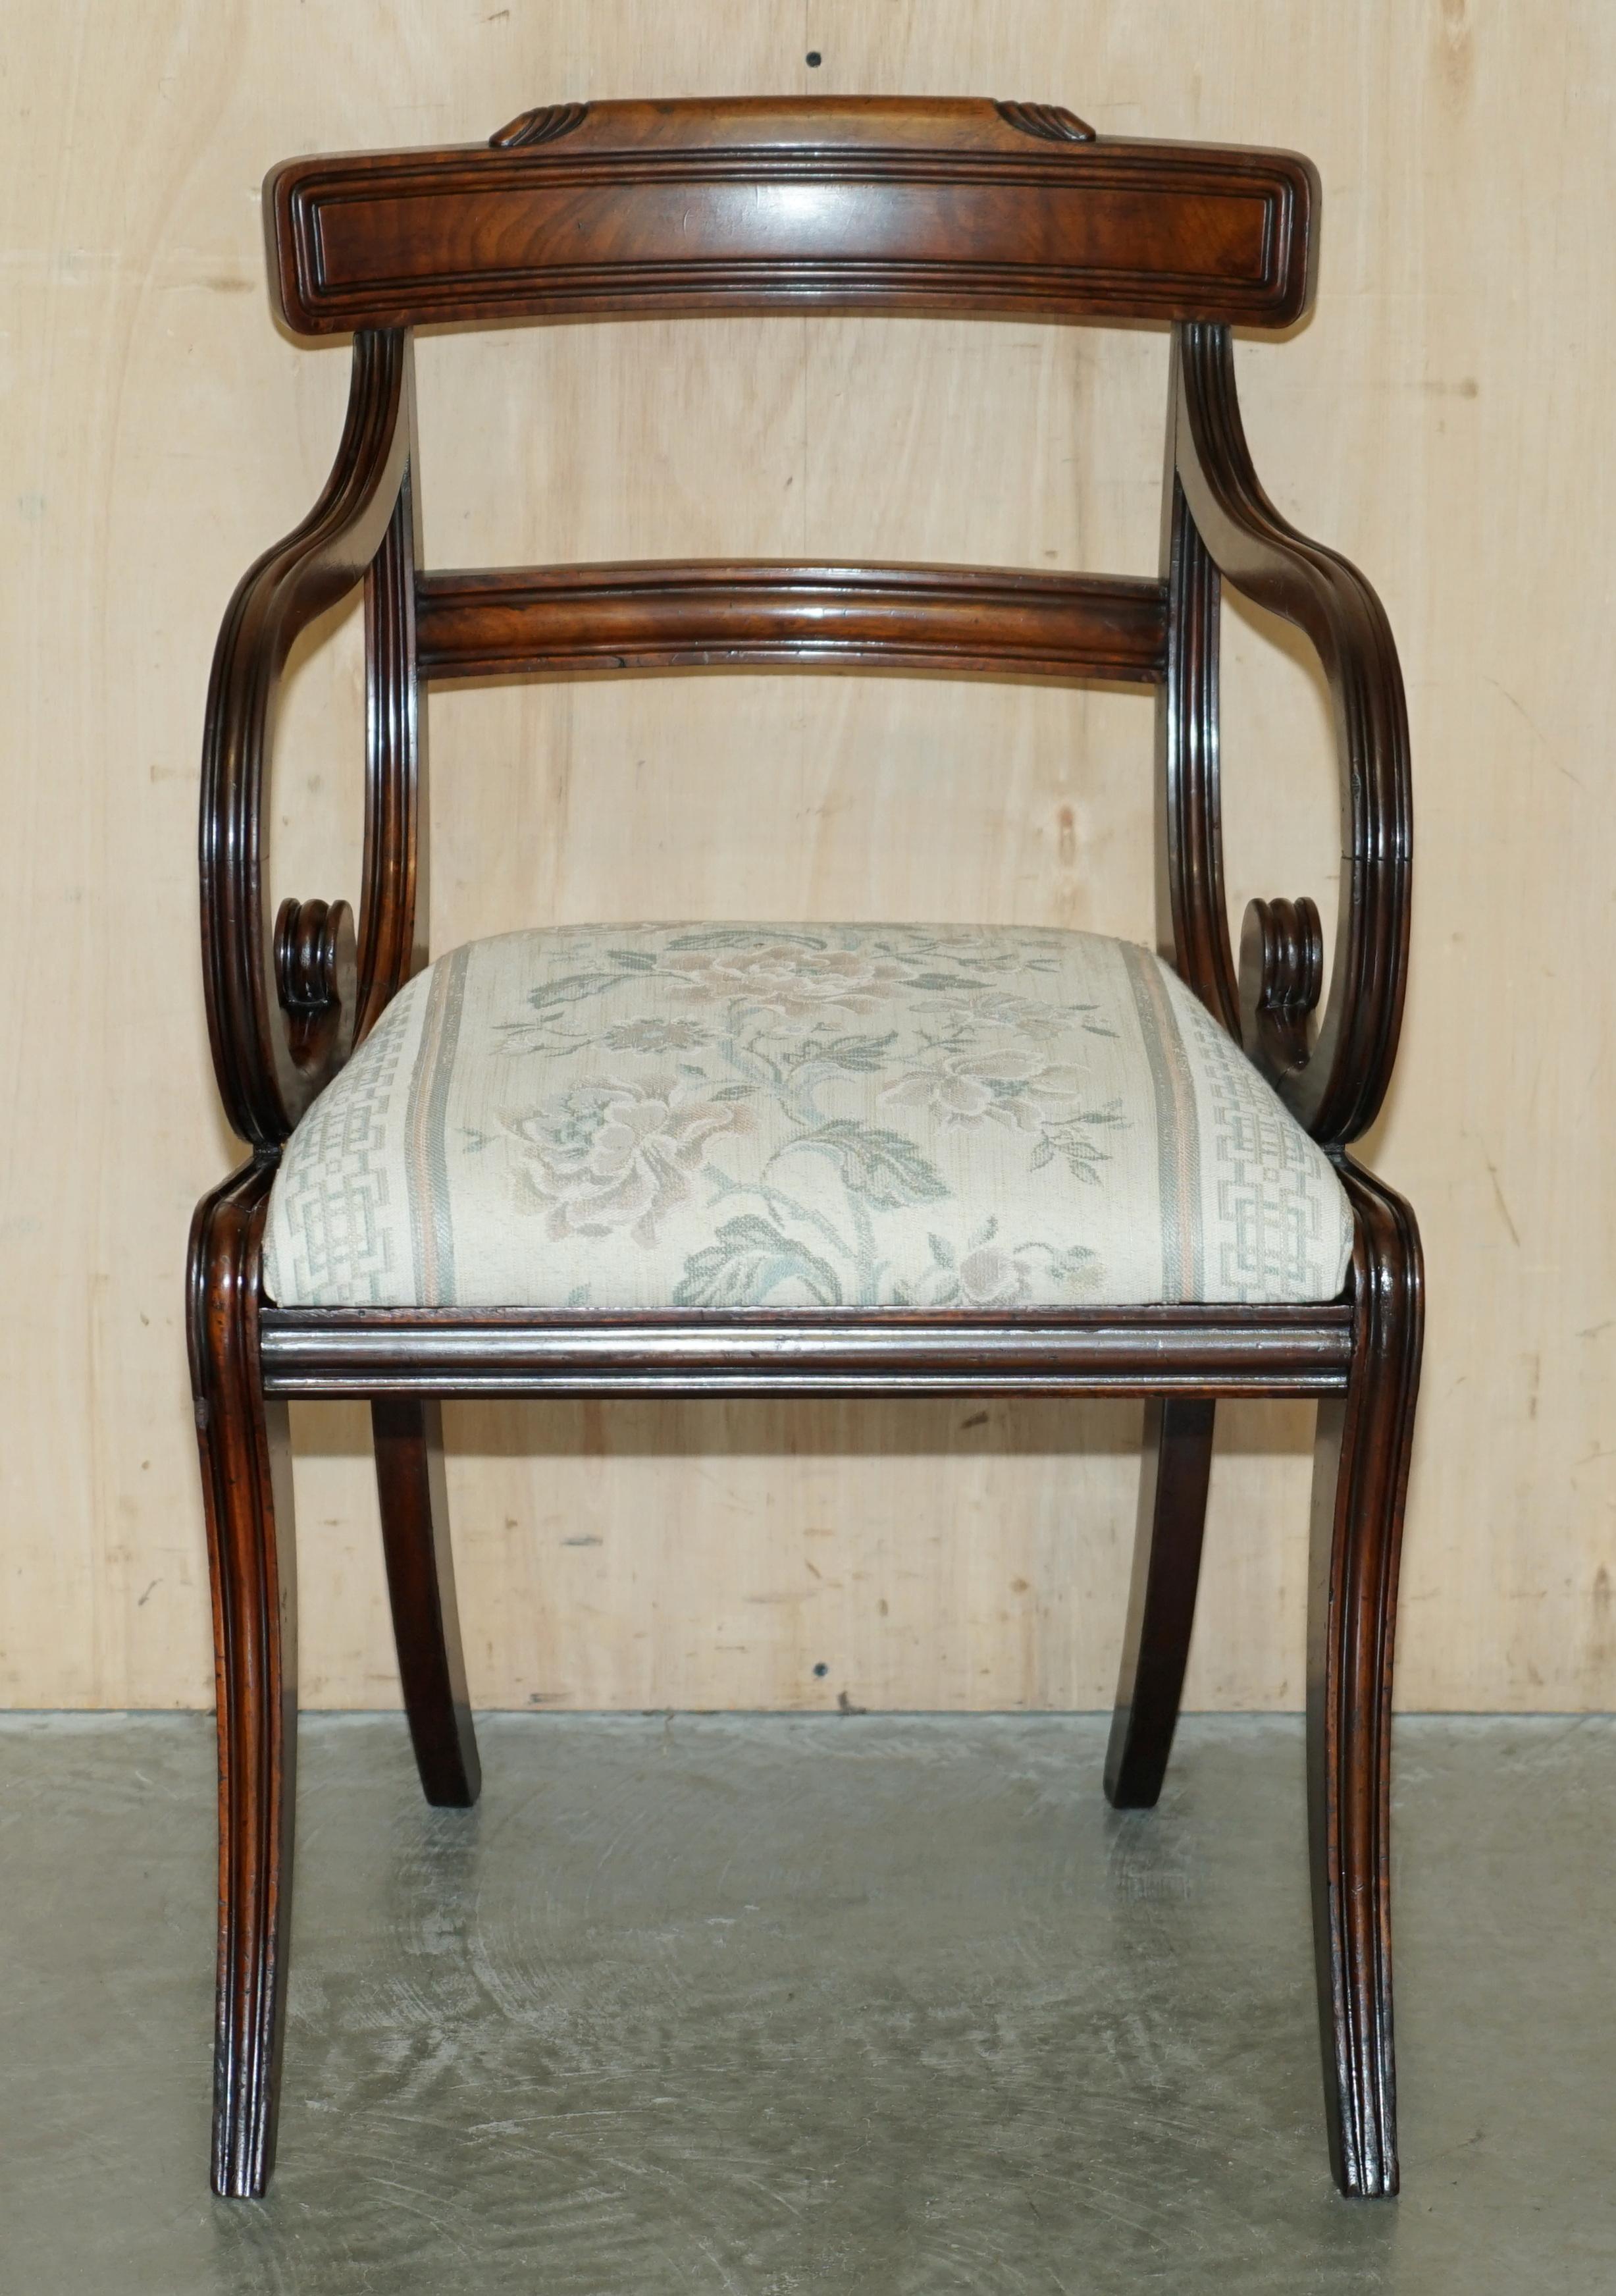 Royal House Antiques

Royal House Antiques is delighted to offer for sale this very elegant English Regency Gillow's style office desk armchair with saber legs 

Please note the delivery fee listed is just a guide, it covers within the M25 only for